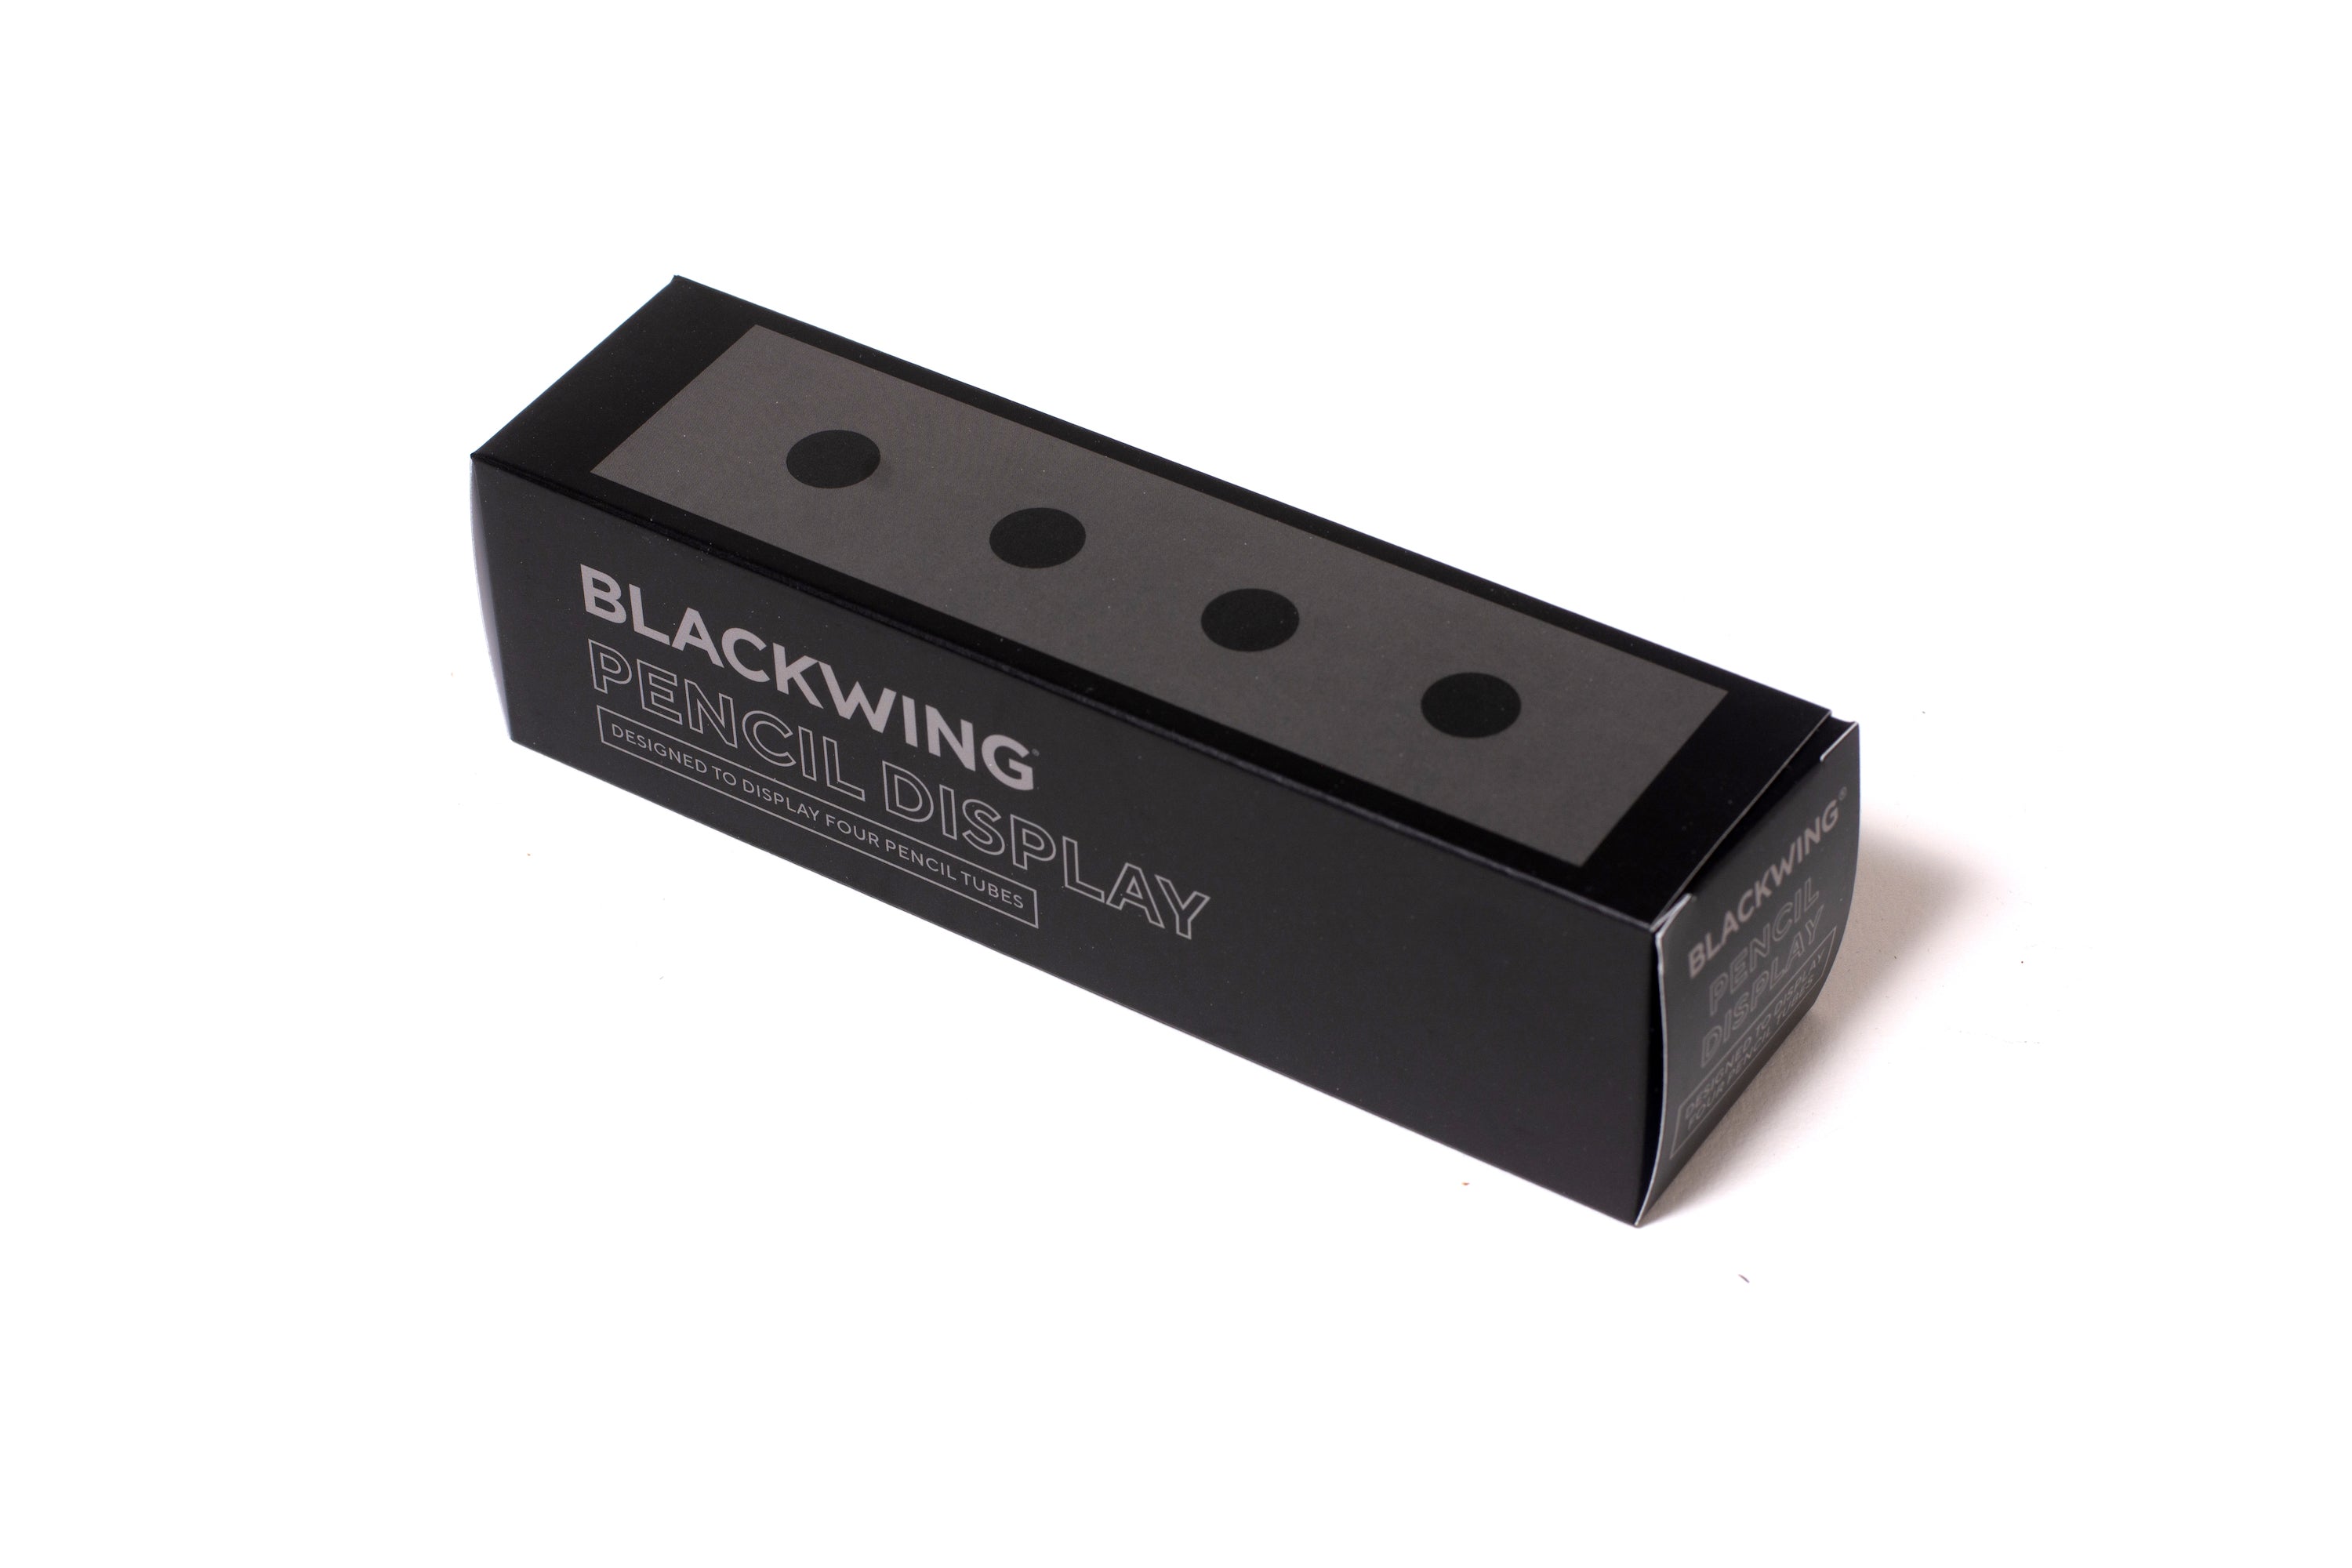 A black box with a Blackwing Upright Four Tube Display logo on it.